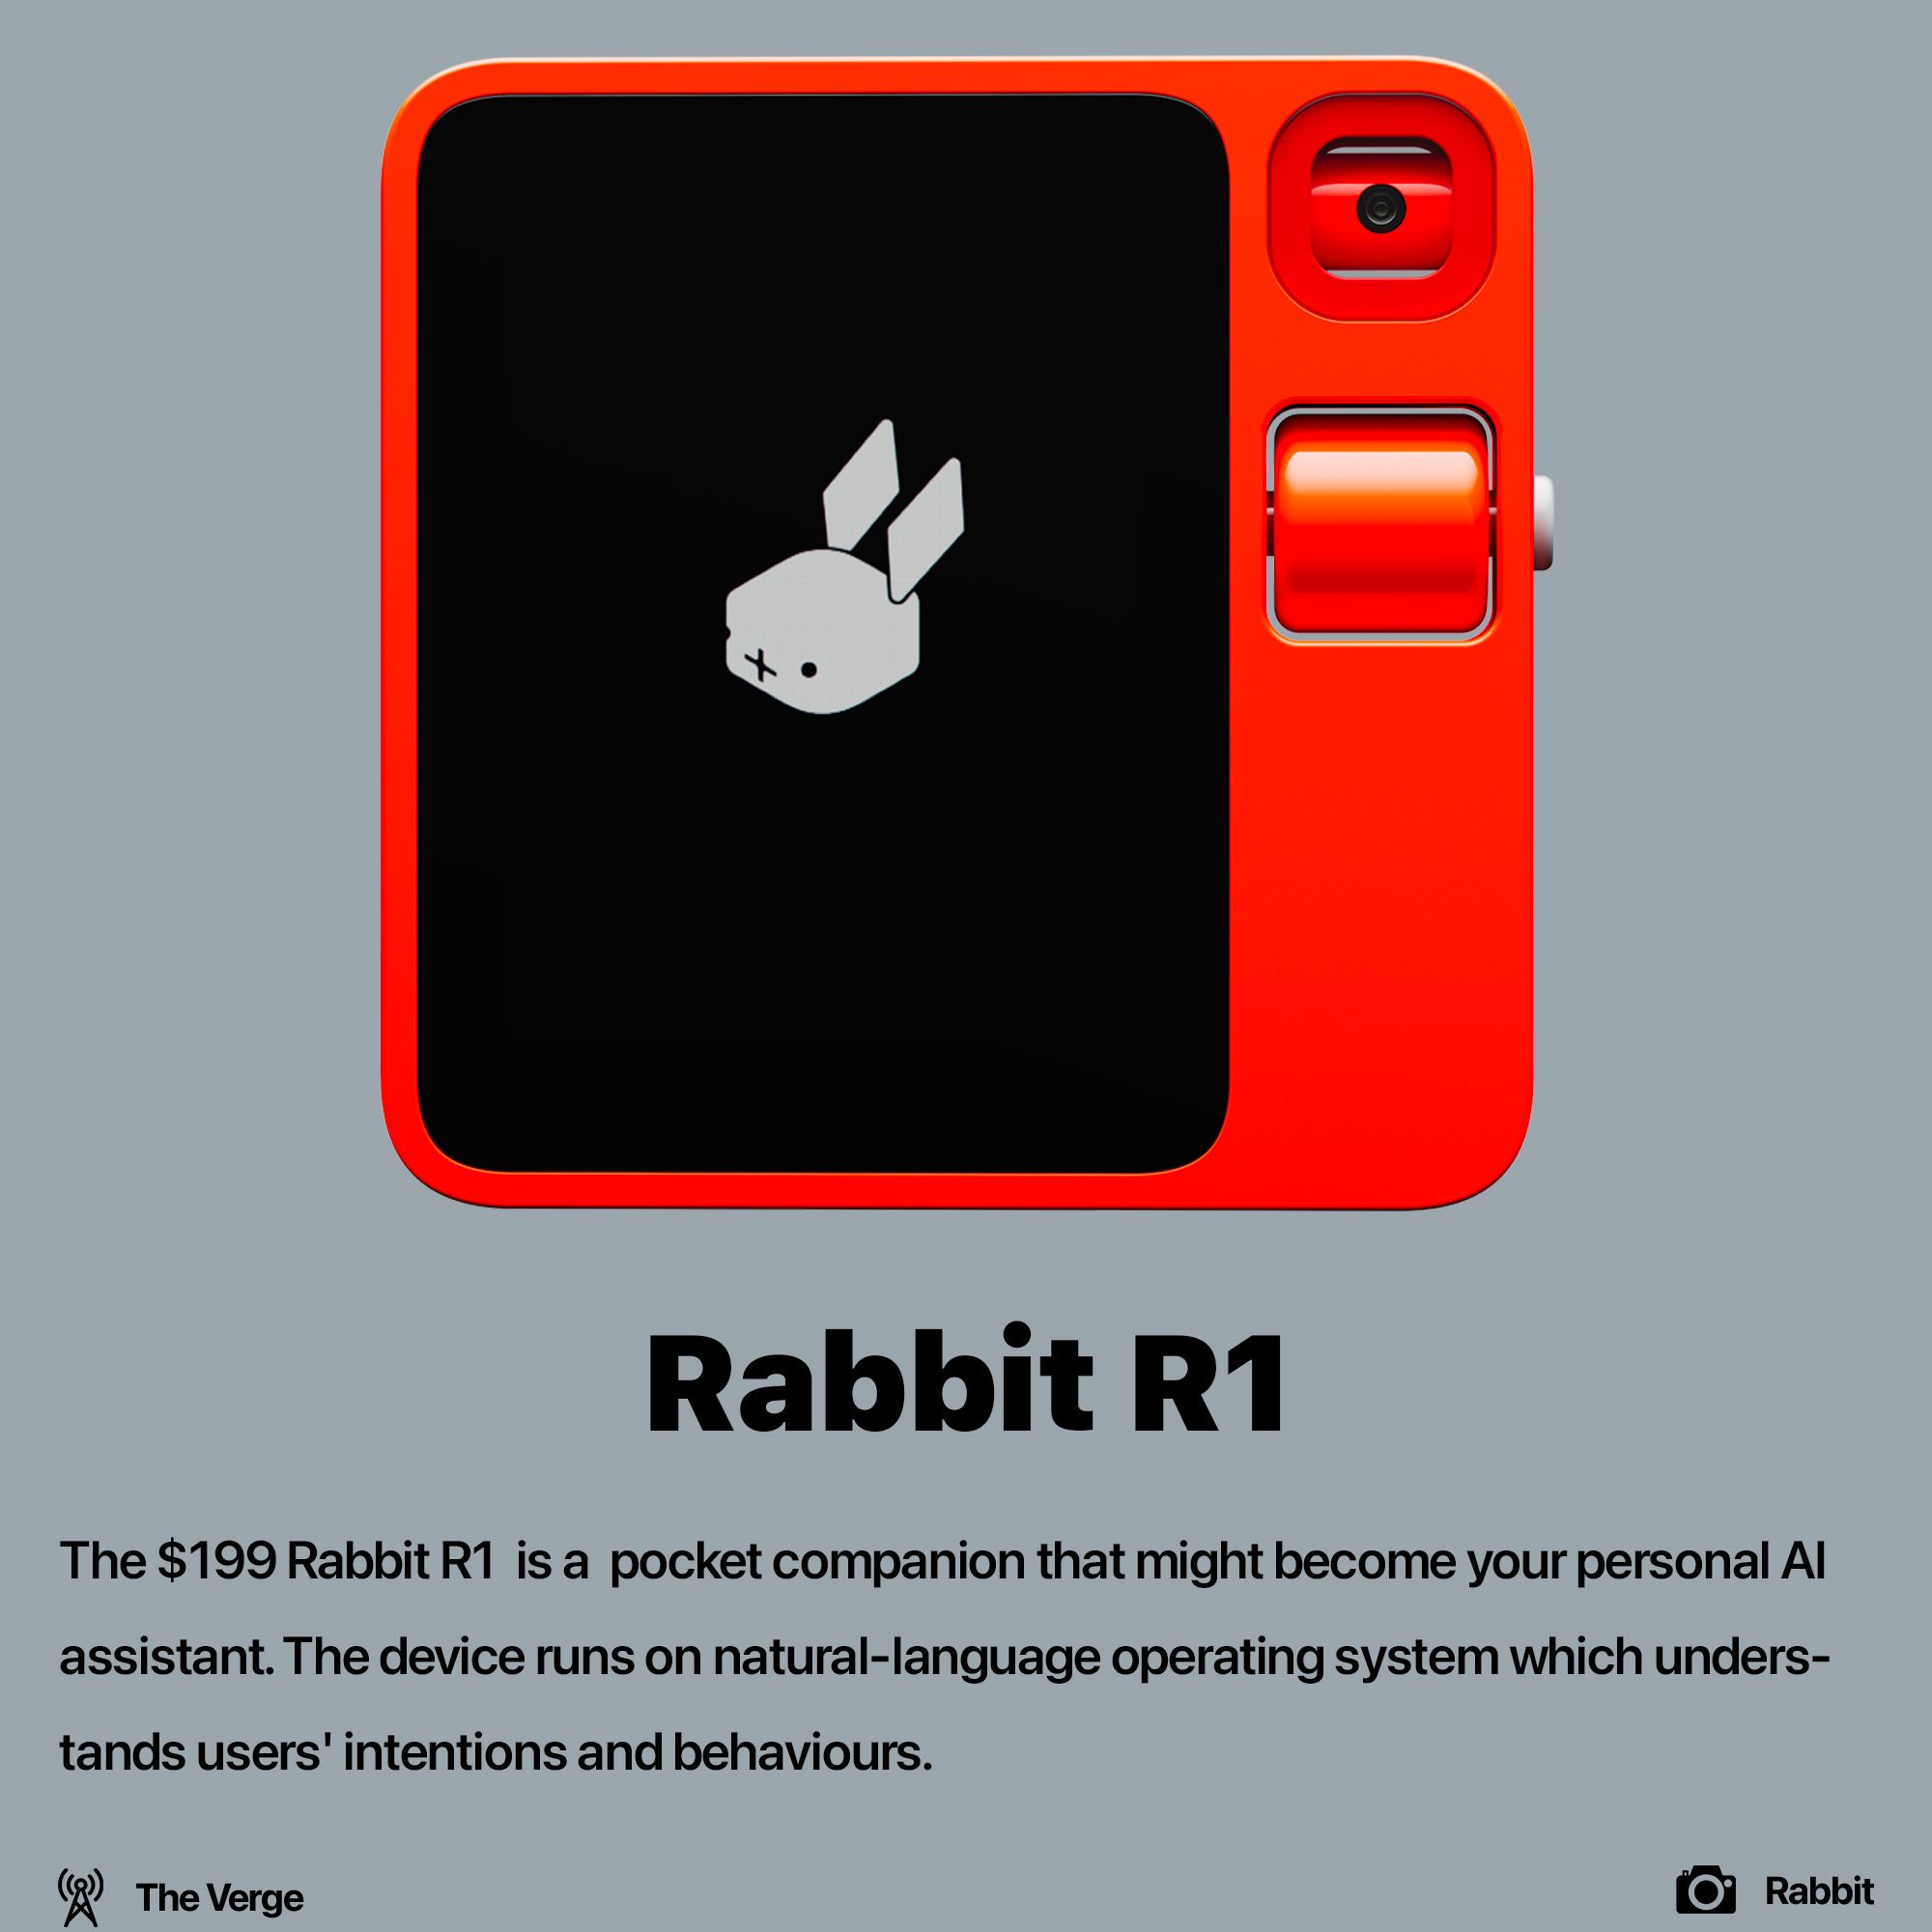 Rabbit R1 launched